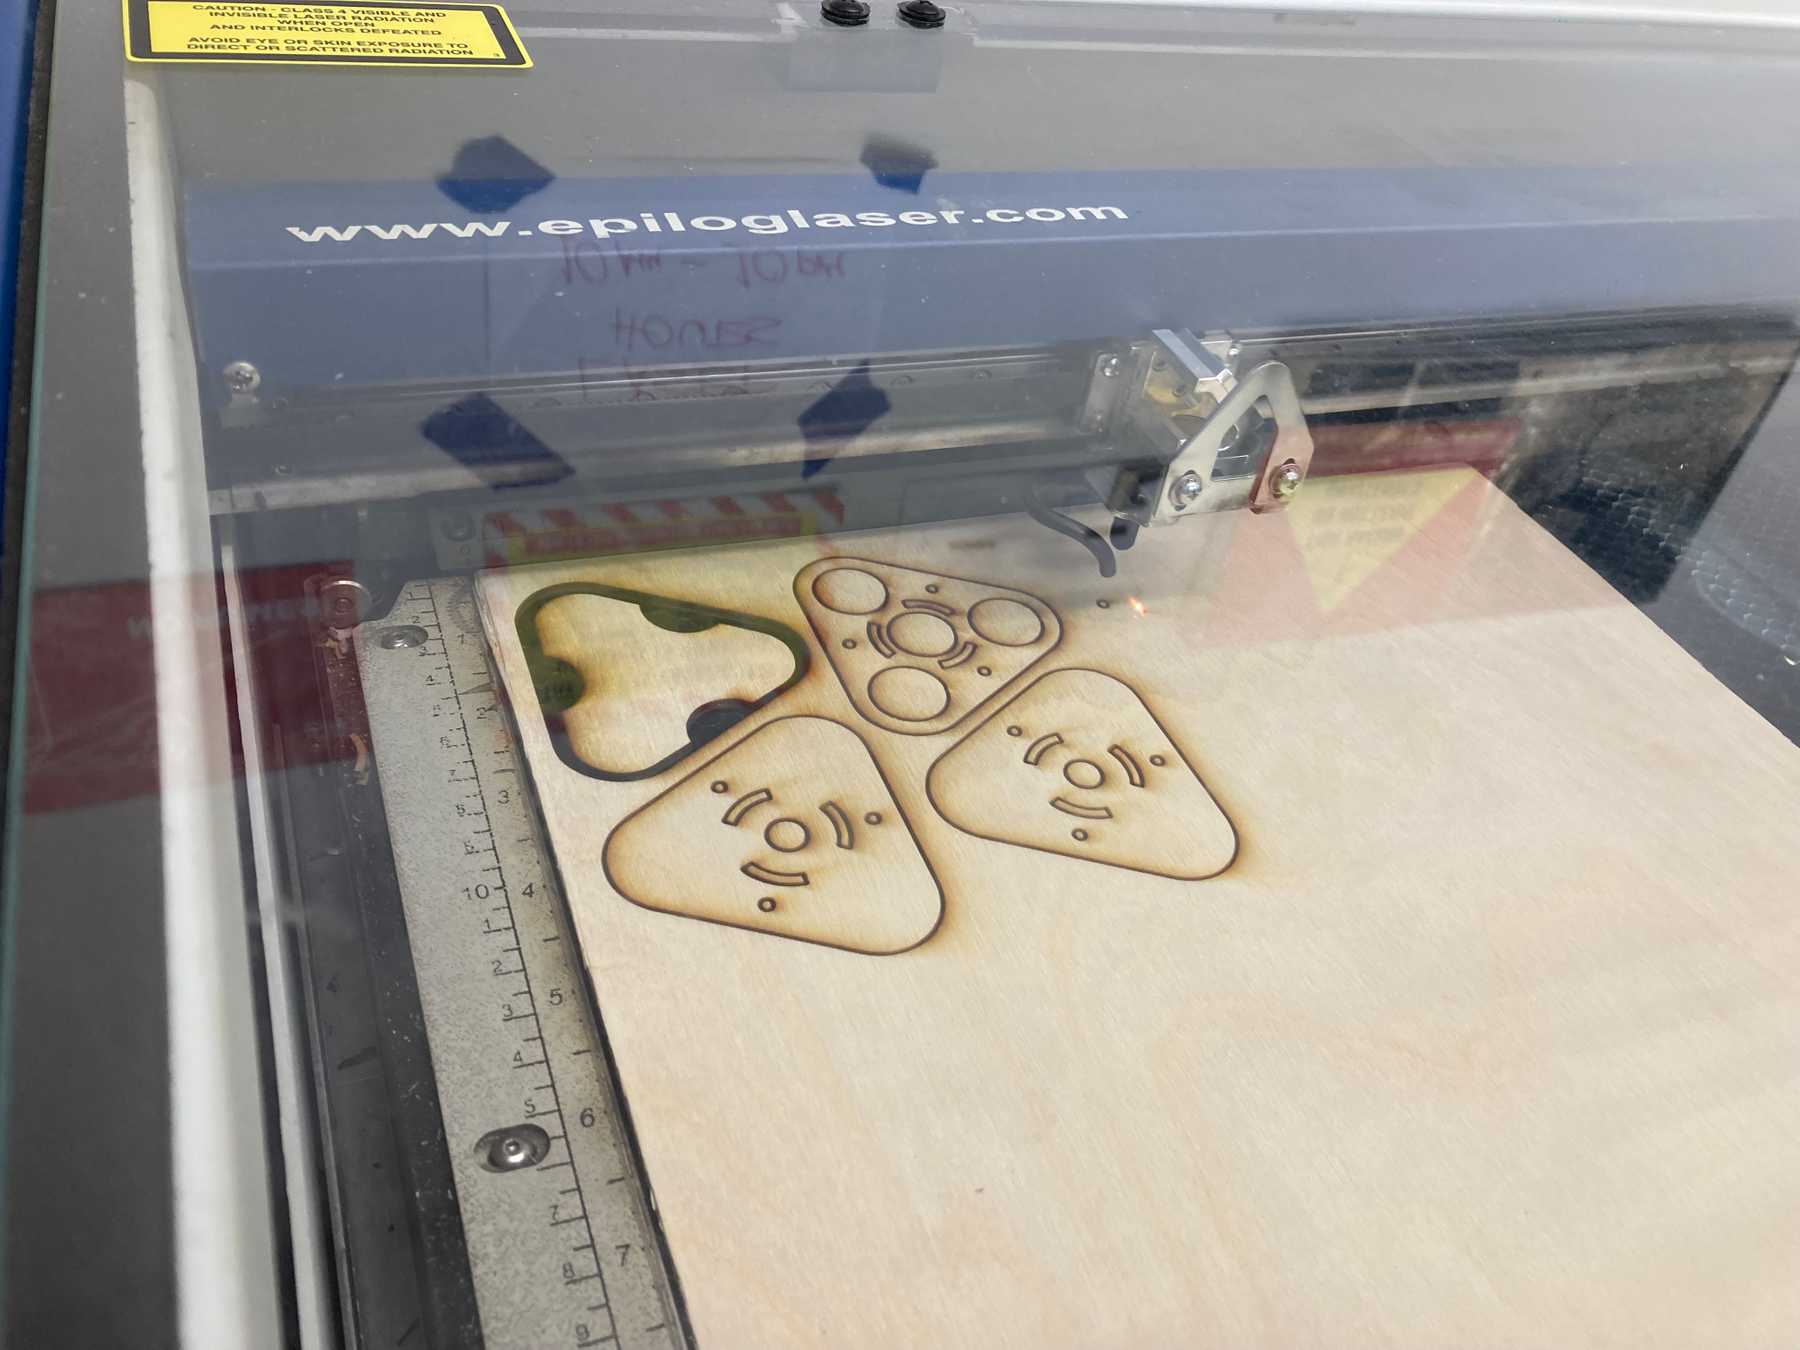 Laser cutting the wooden pieces